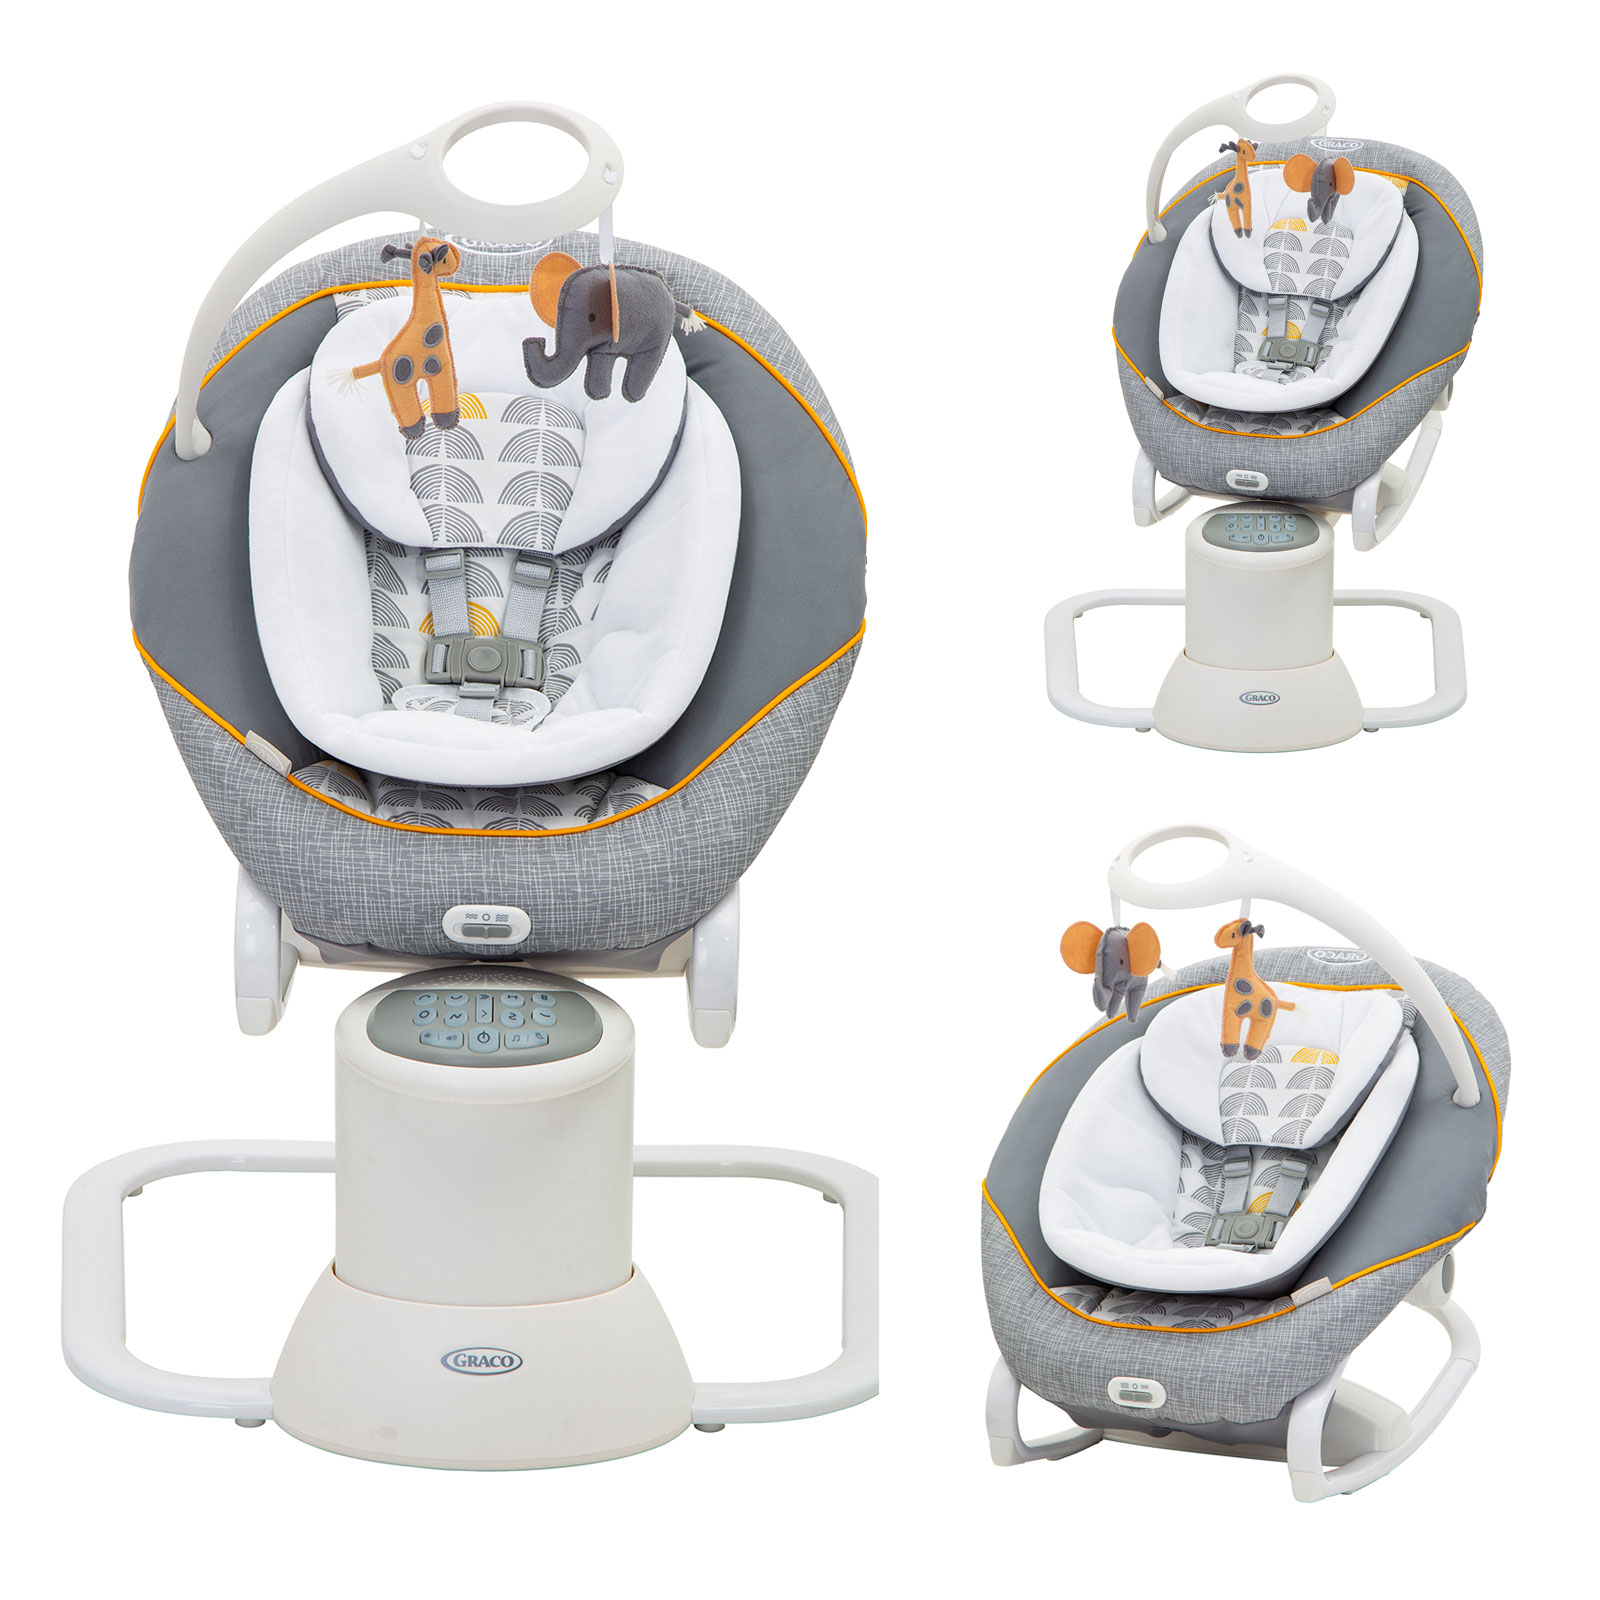 Graco All Ways Soother at Sounds 2in1 Grey / with Musical Horizon Swing & – Vibration Buy Online4baby Rocker 